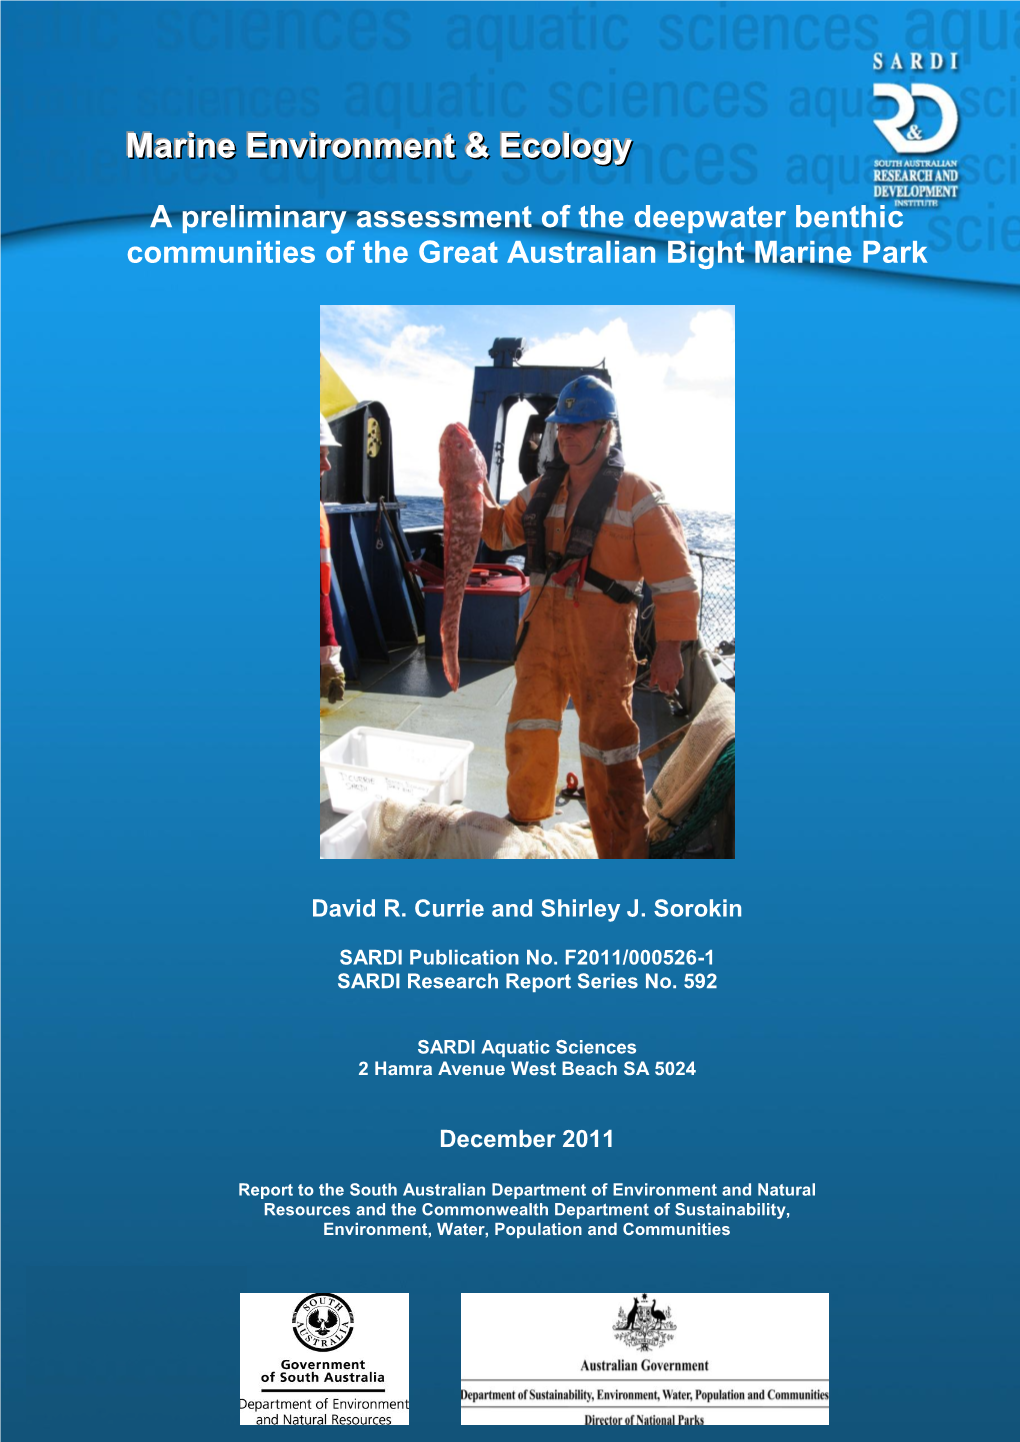 A Preliminary Assessment of the Deepwater Benthic Communities of the Great Australian Bight Marine Park